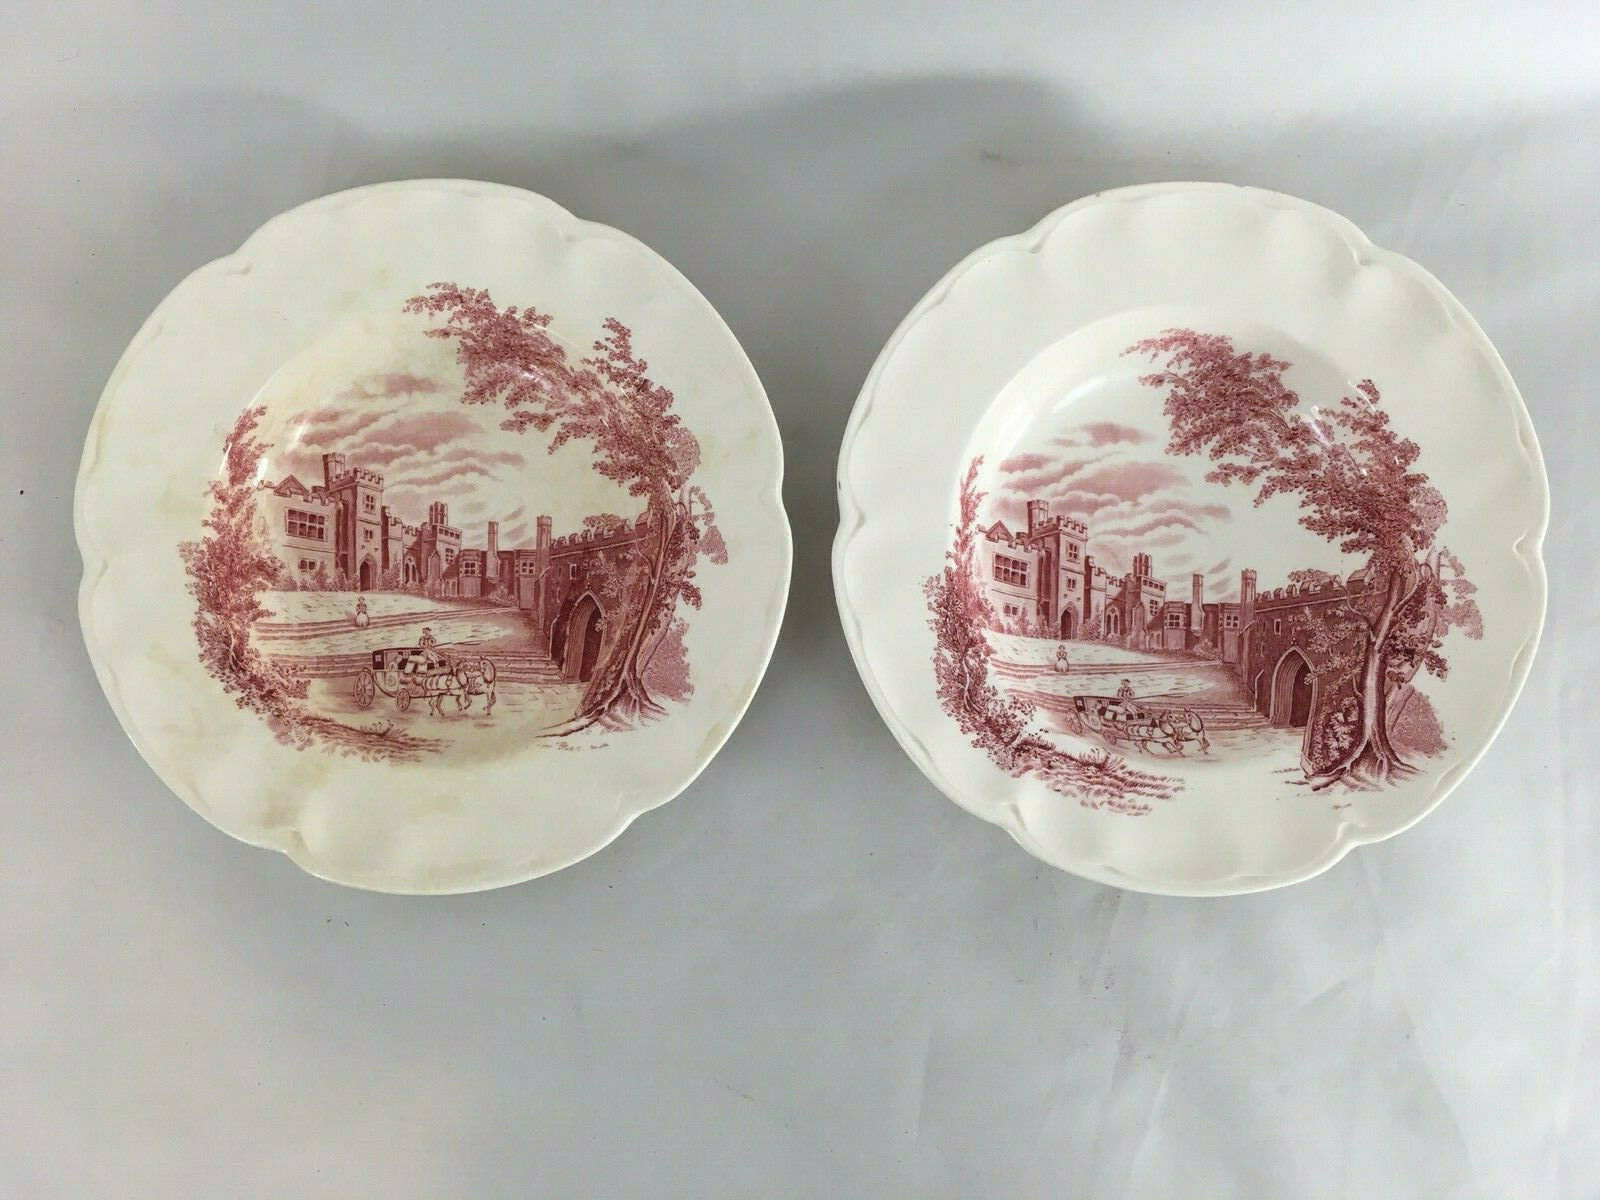 The Old Mill English Dinner Plates  Set of 4 Ironstone Plates  Made in England by Johnson Bros  All Hand Engraving Under Glaze